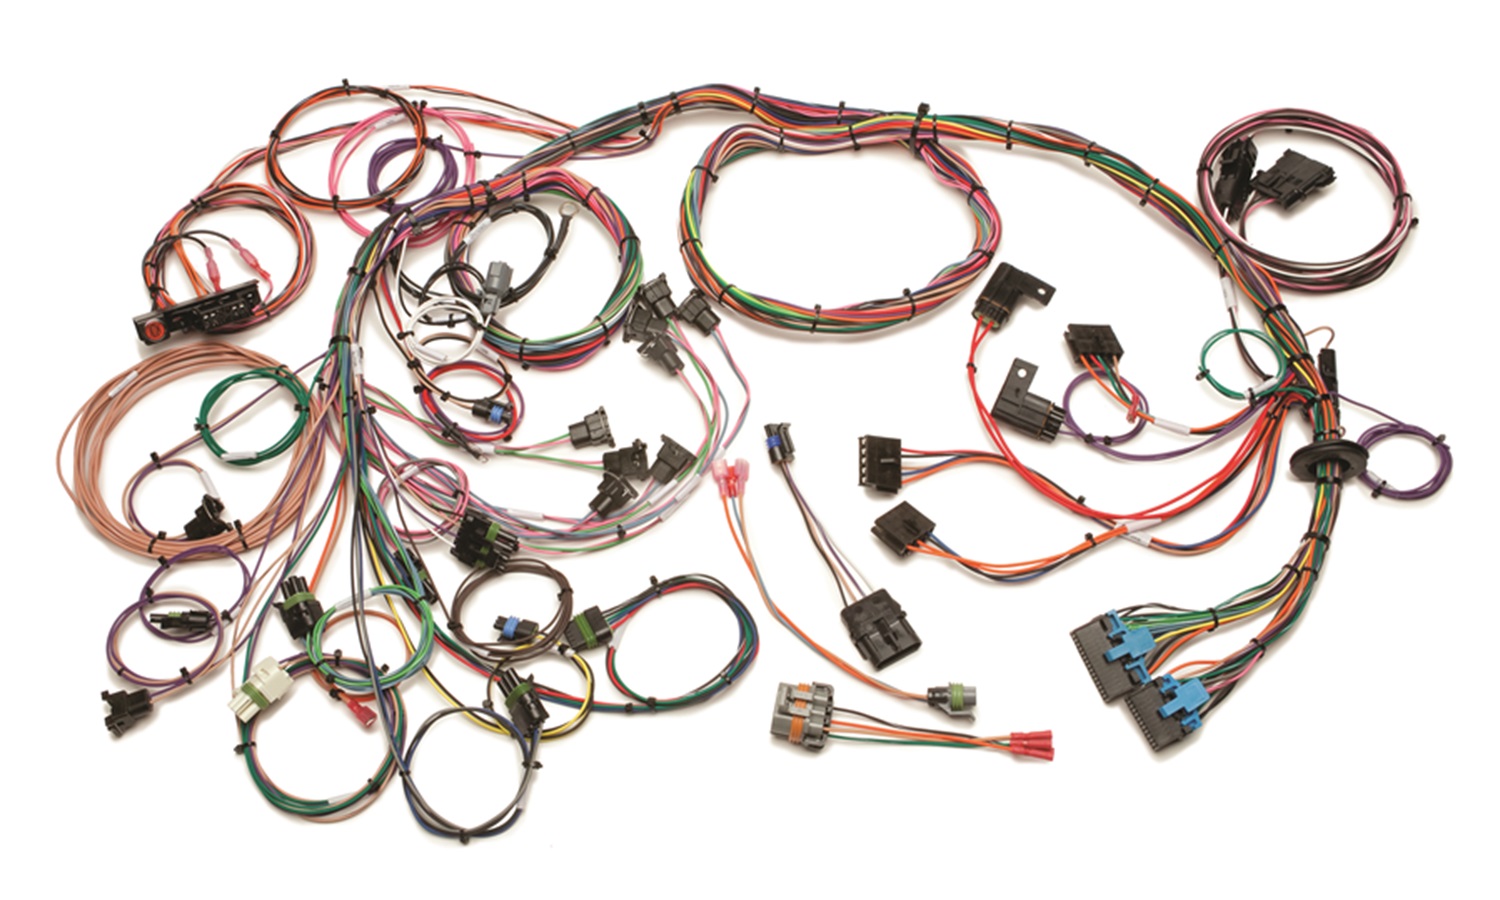 Painless Wiring Painless Wiring 60202 GM TPI Fuel Injection Harness Fits 85-89 Camaro Corvette